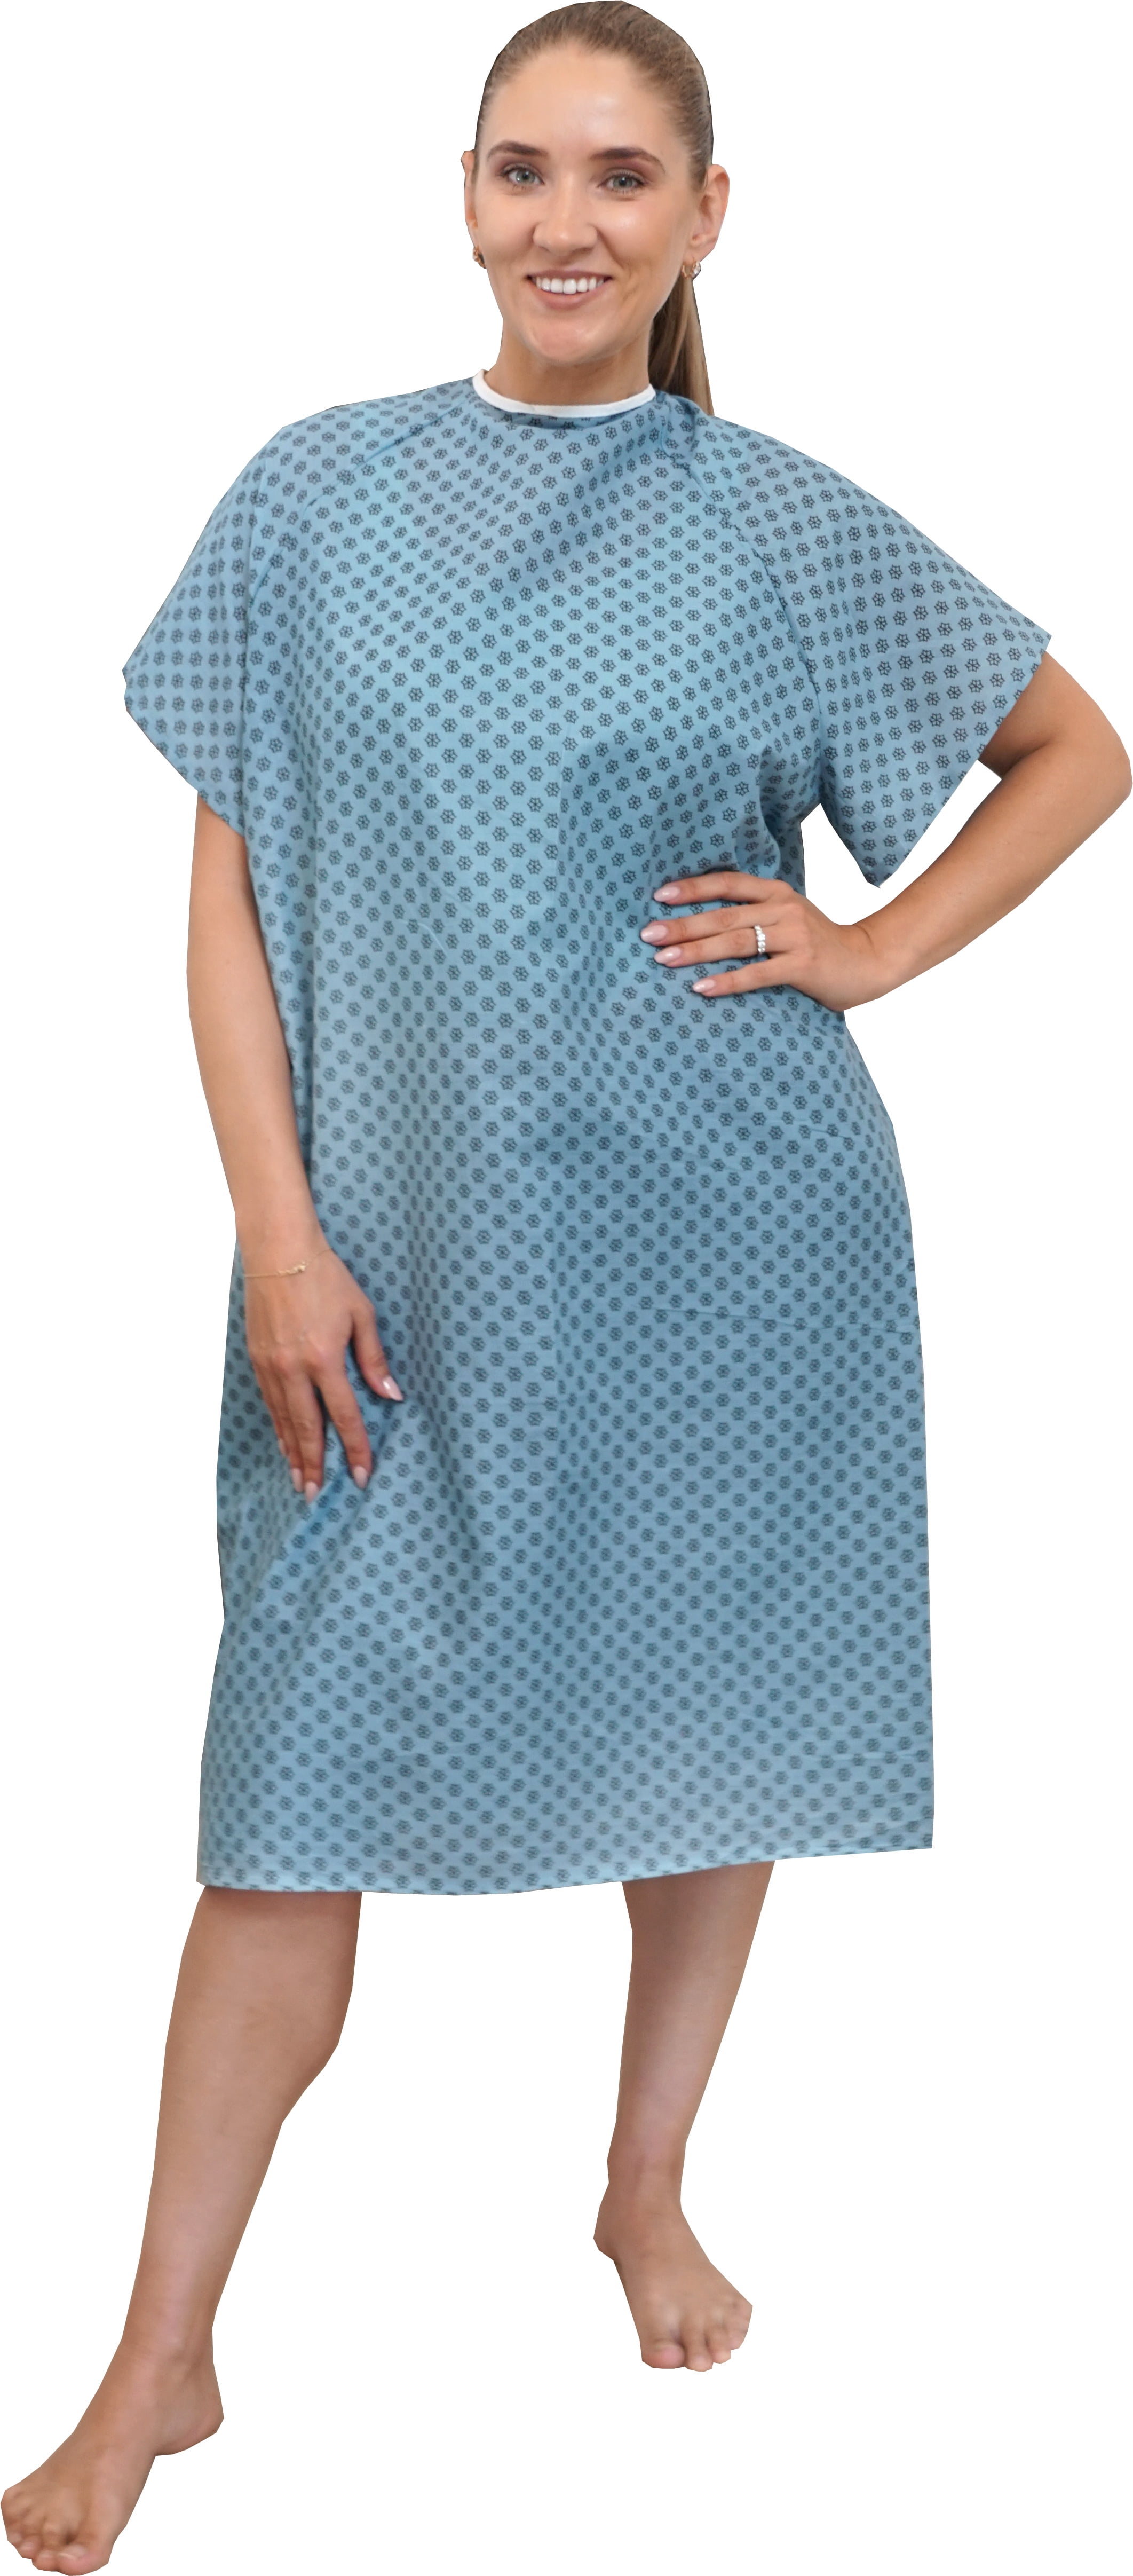 3 Pack Blue Hospital Gown with Back Tie Hospital Patient Gown with Ties One Size Fits All 7344a0cc 9845 4acc 8f38 f8560d7af7f2.d312d15151ea99d7a0c224098916ceb4